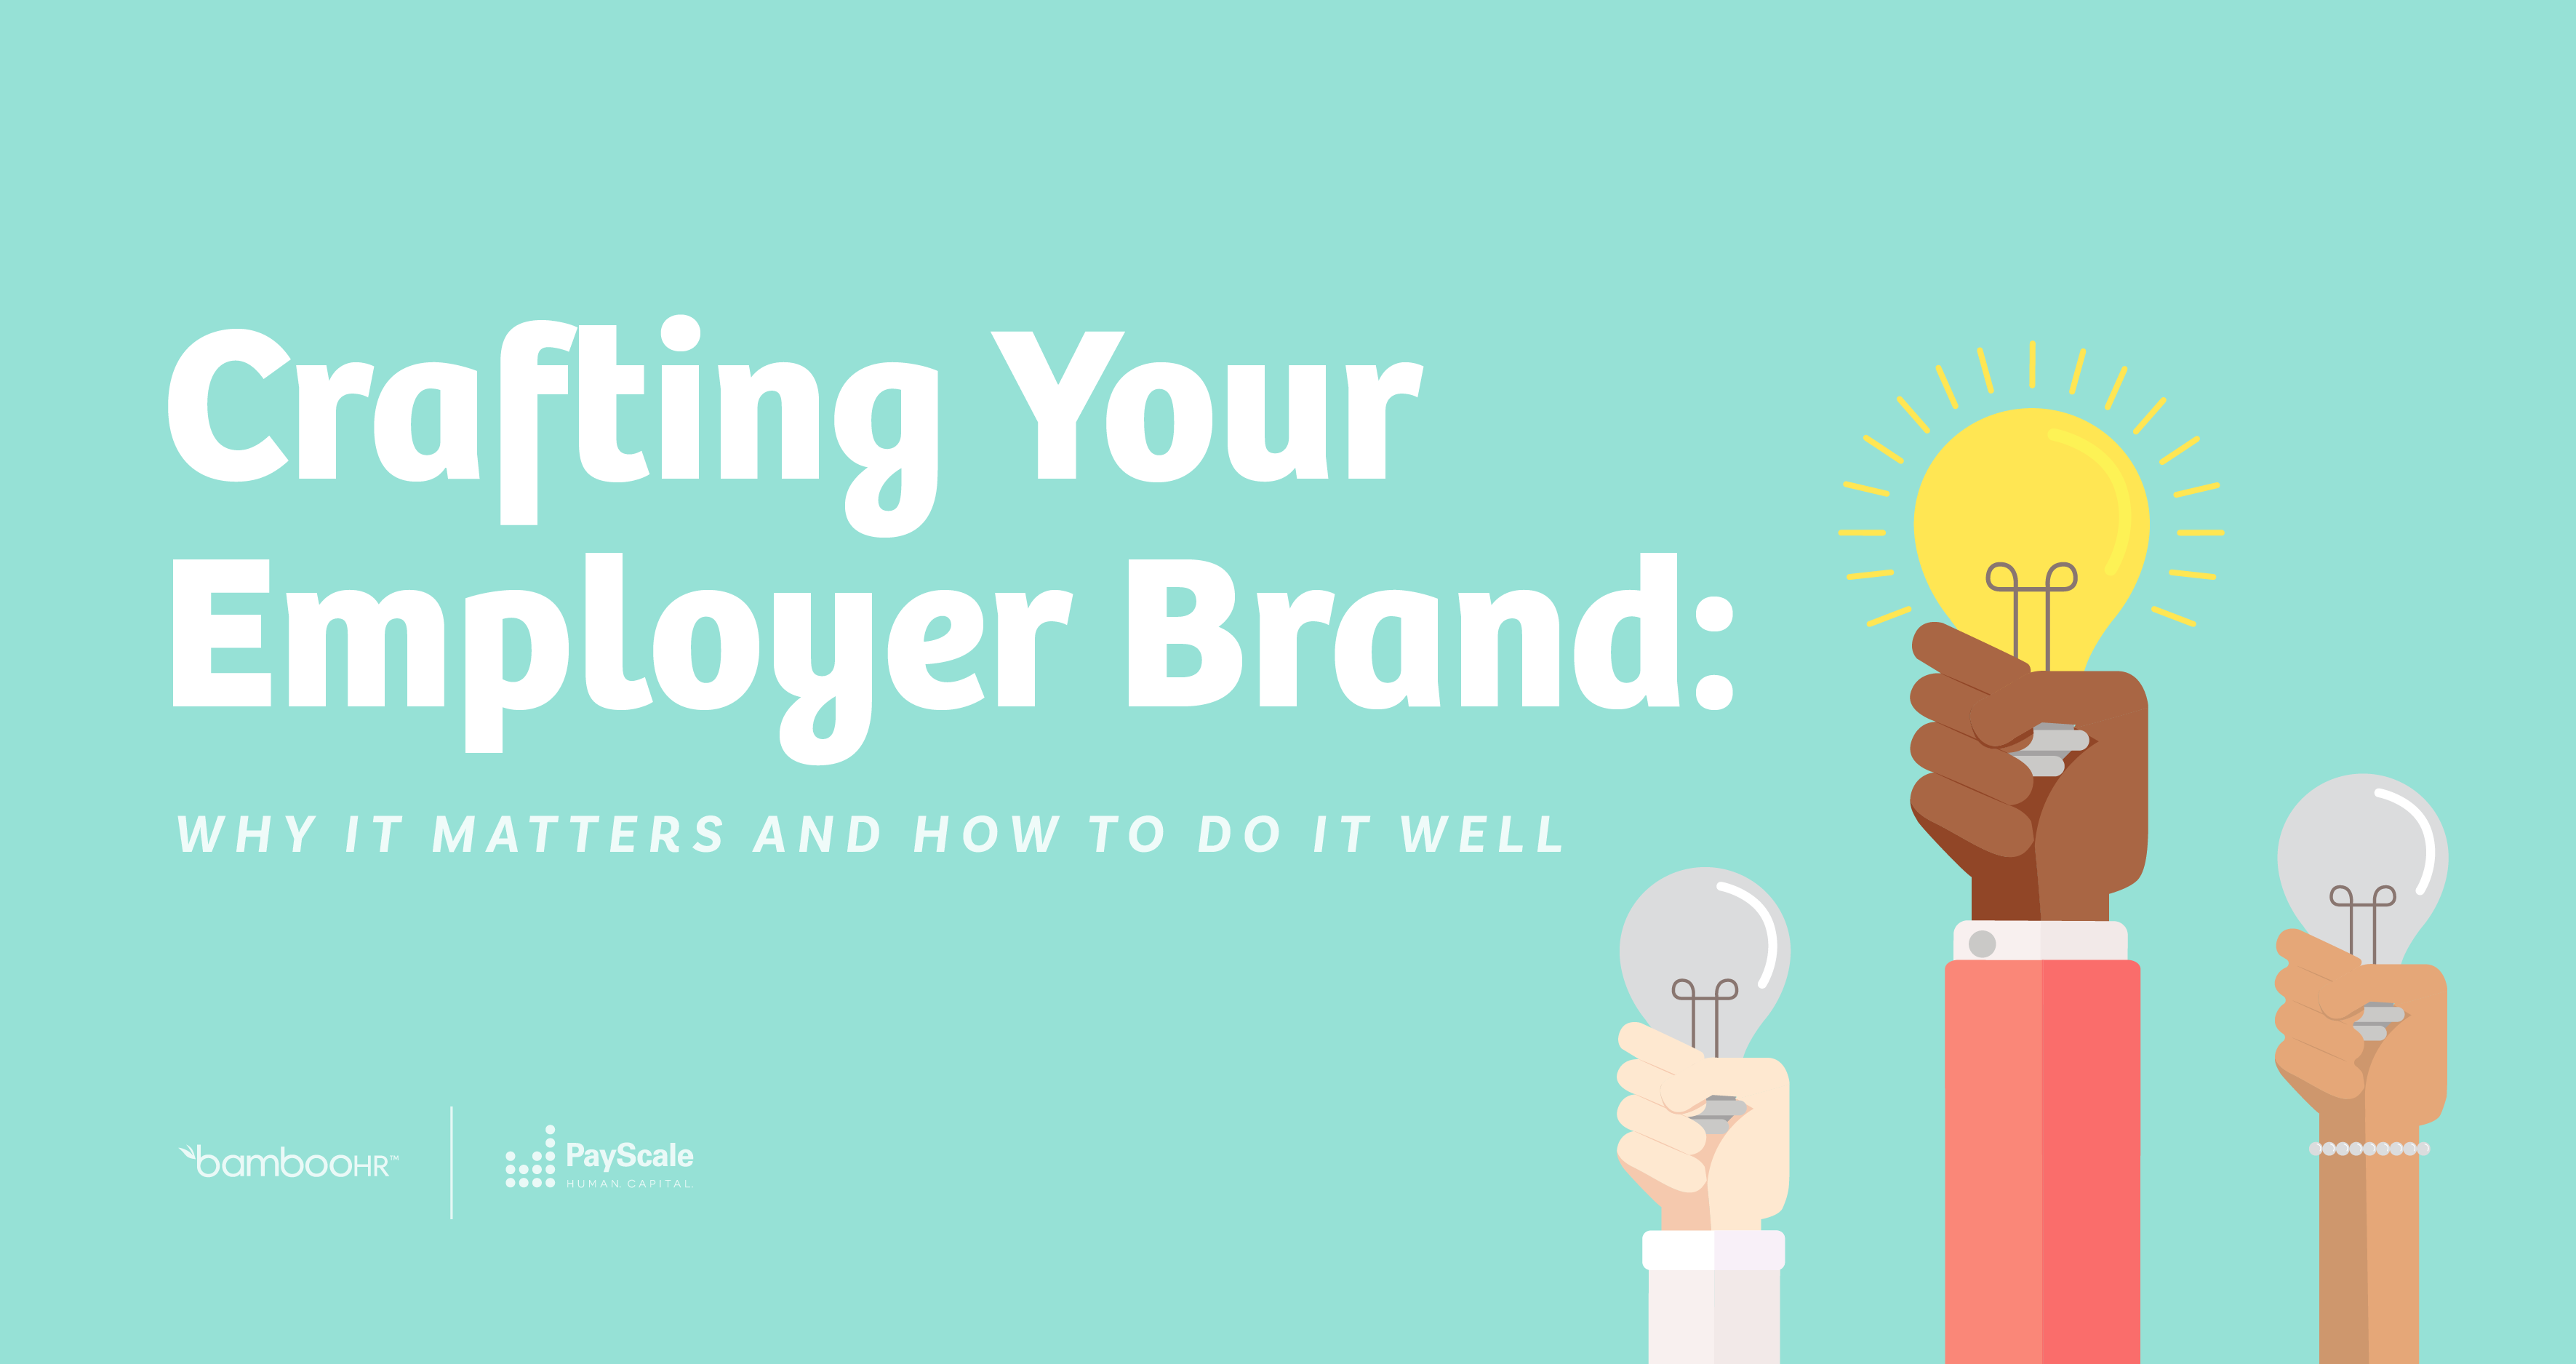 Crafting Your Employer Brand: Why It Matters and How to Do it Well